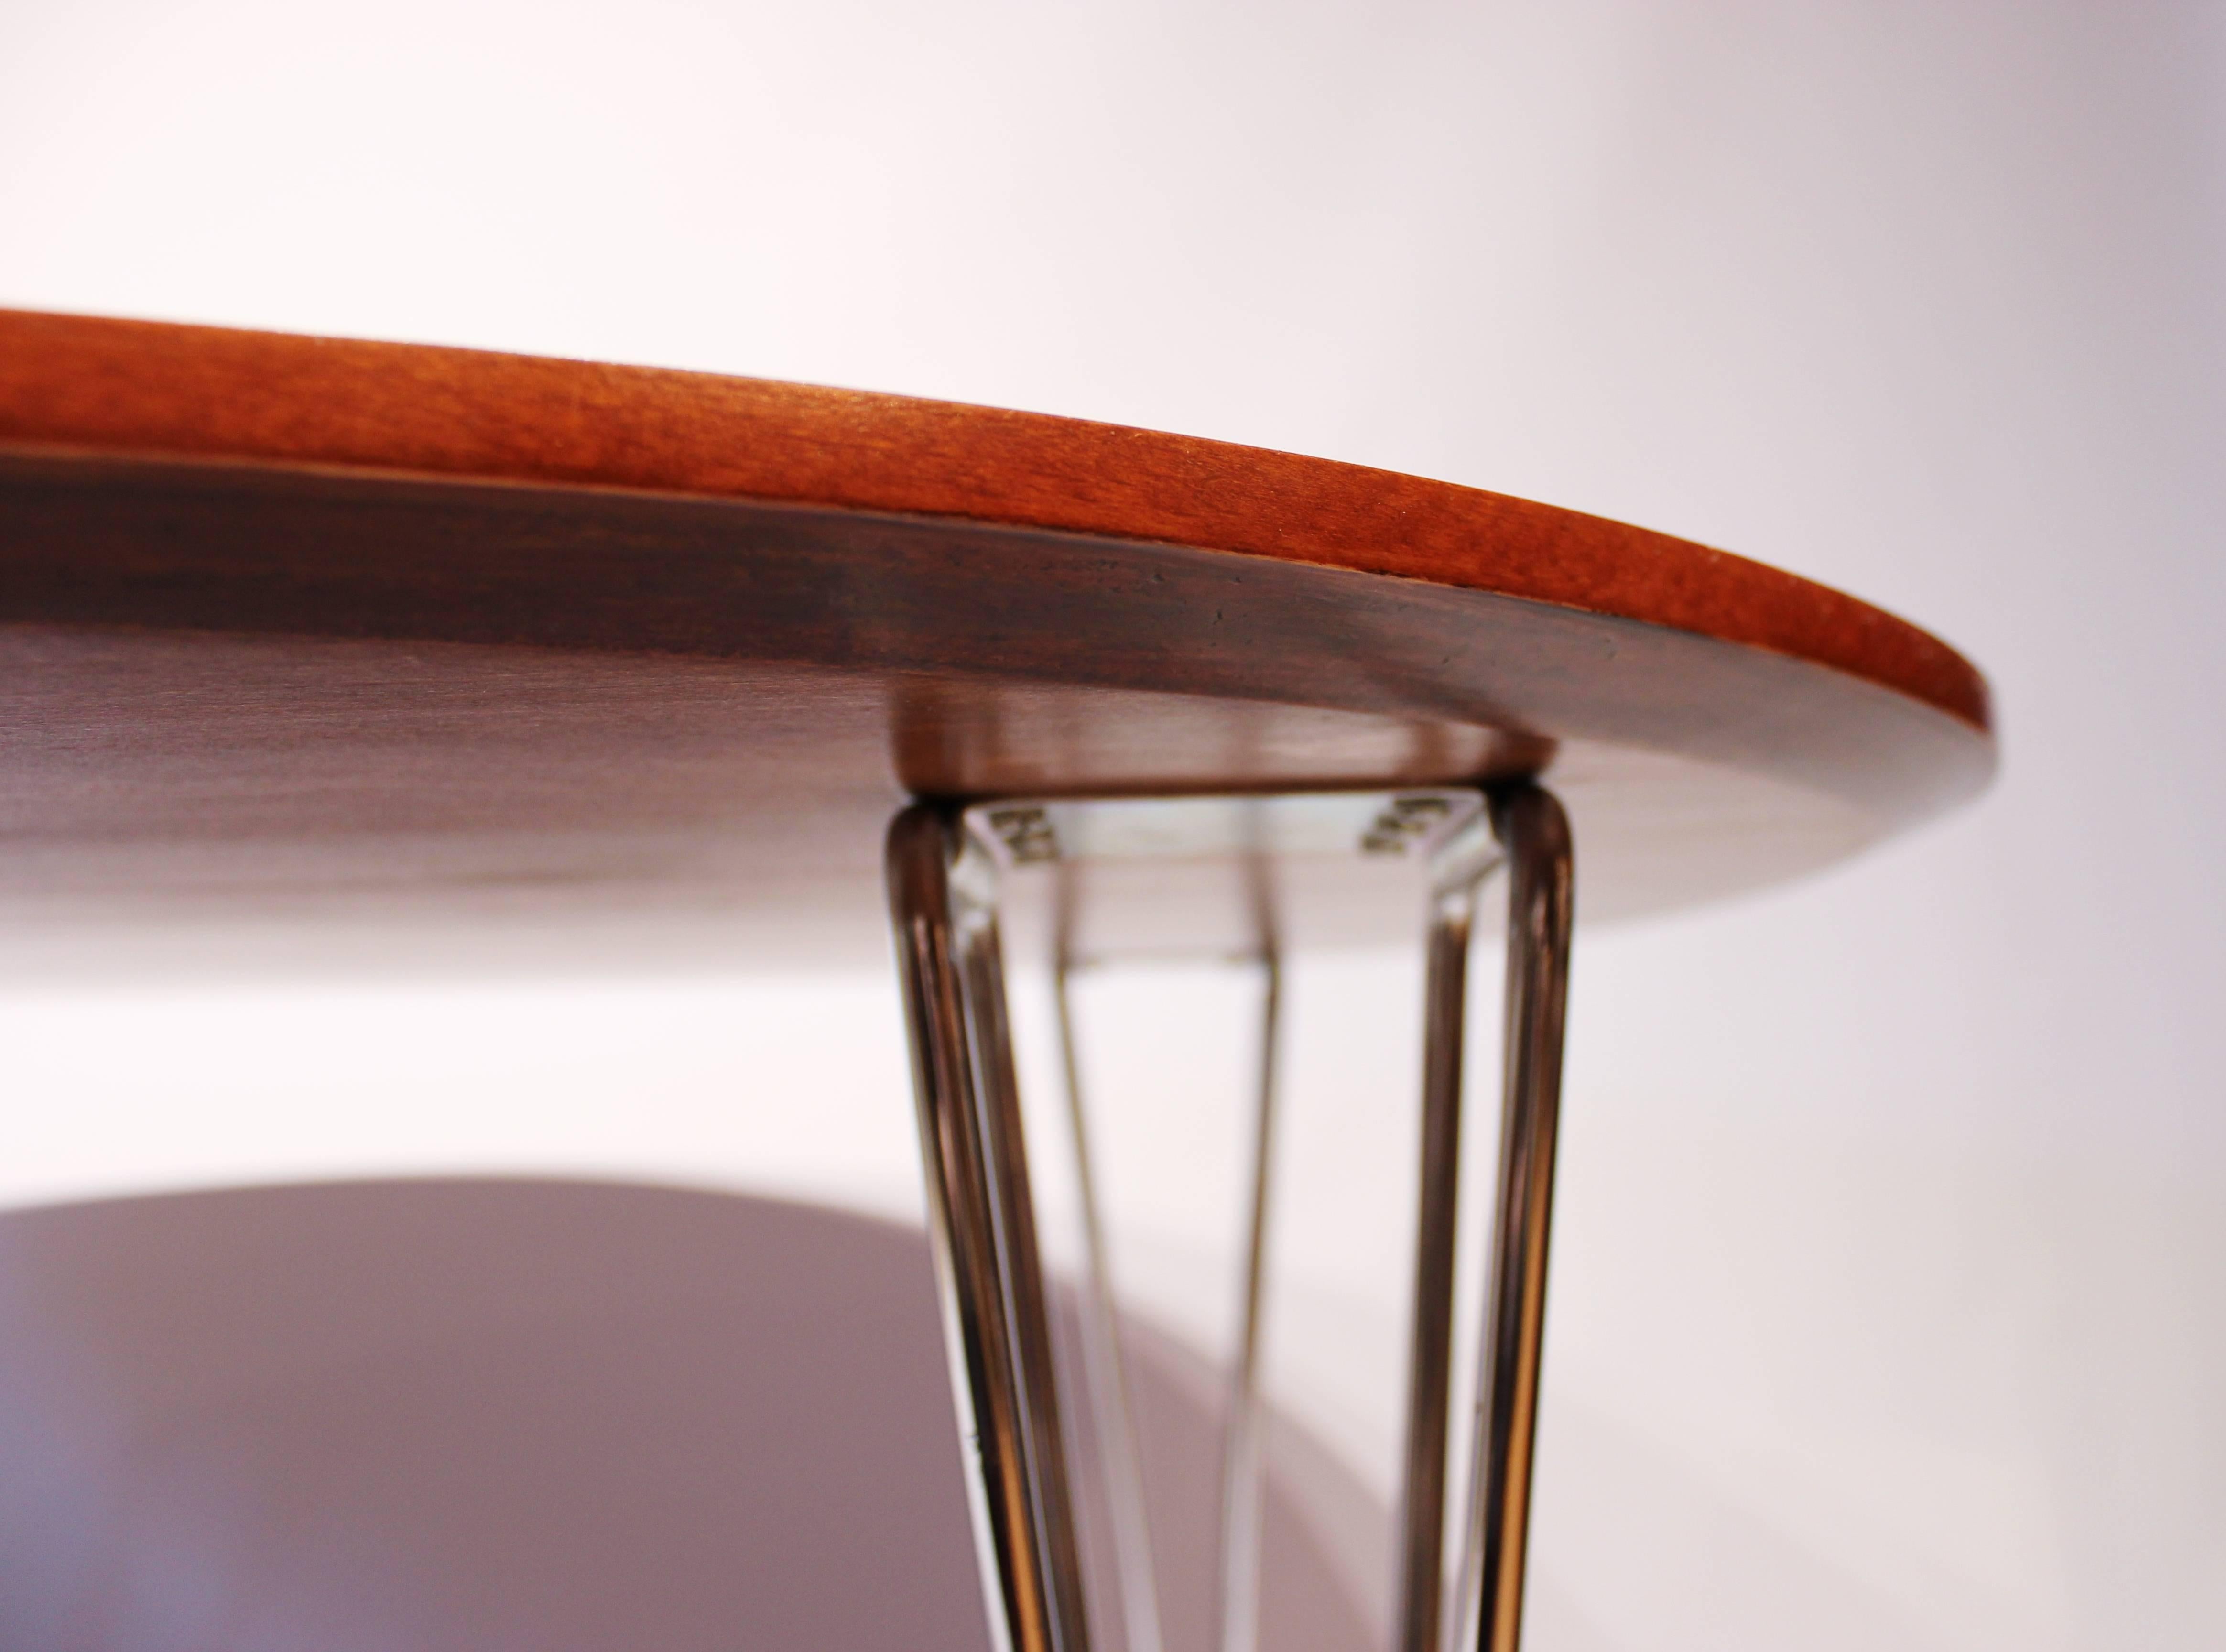 Super Ellipse Table in Rosewood by Piet Hein, Arne Jacobsen and Bruno Mathsson 3